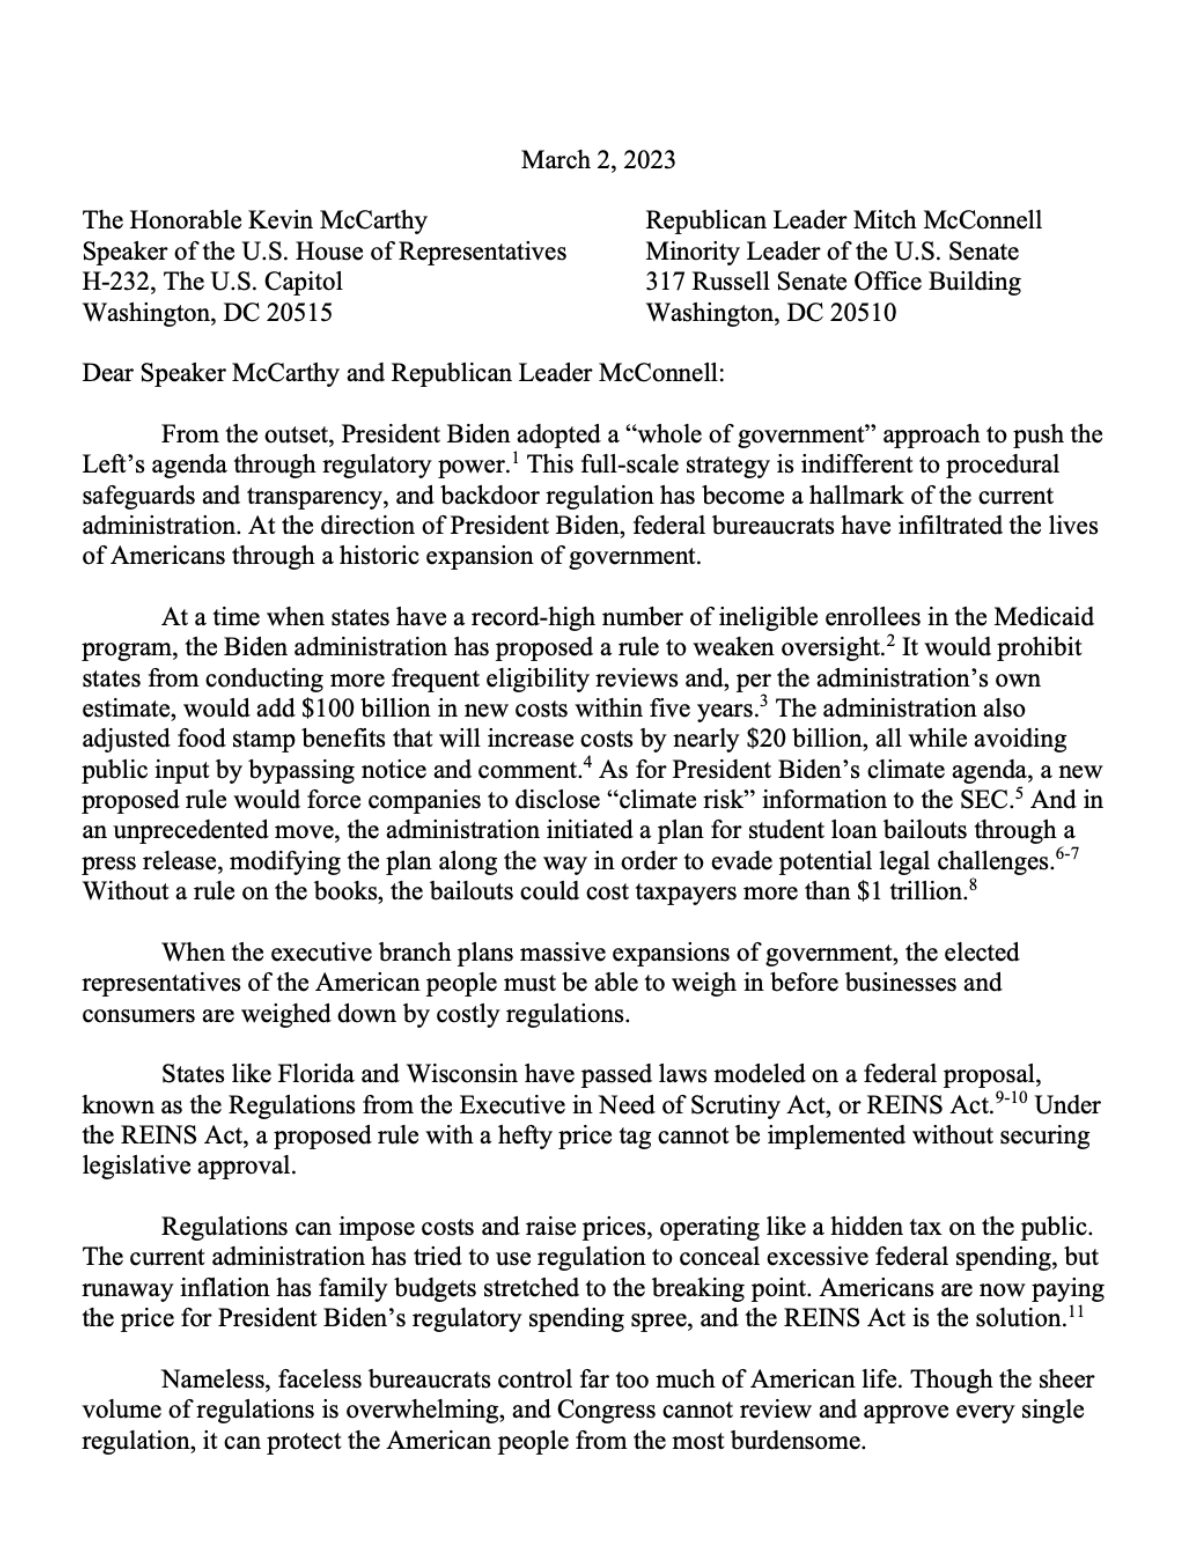 FGA Coalition Letter to Congressional Leadership on the REINS Act